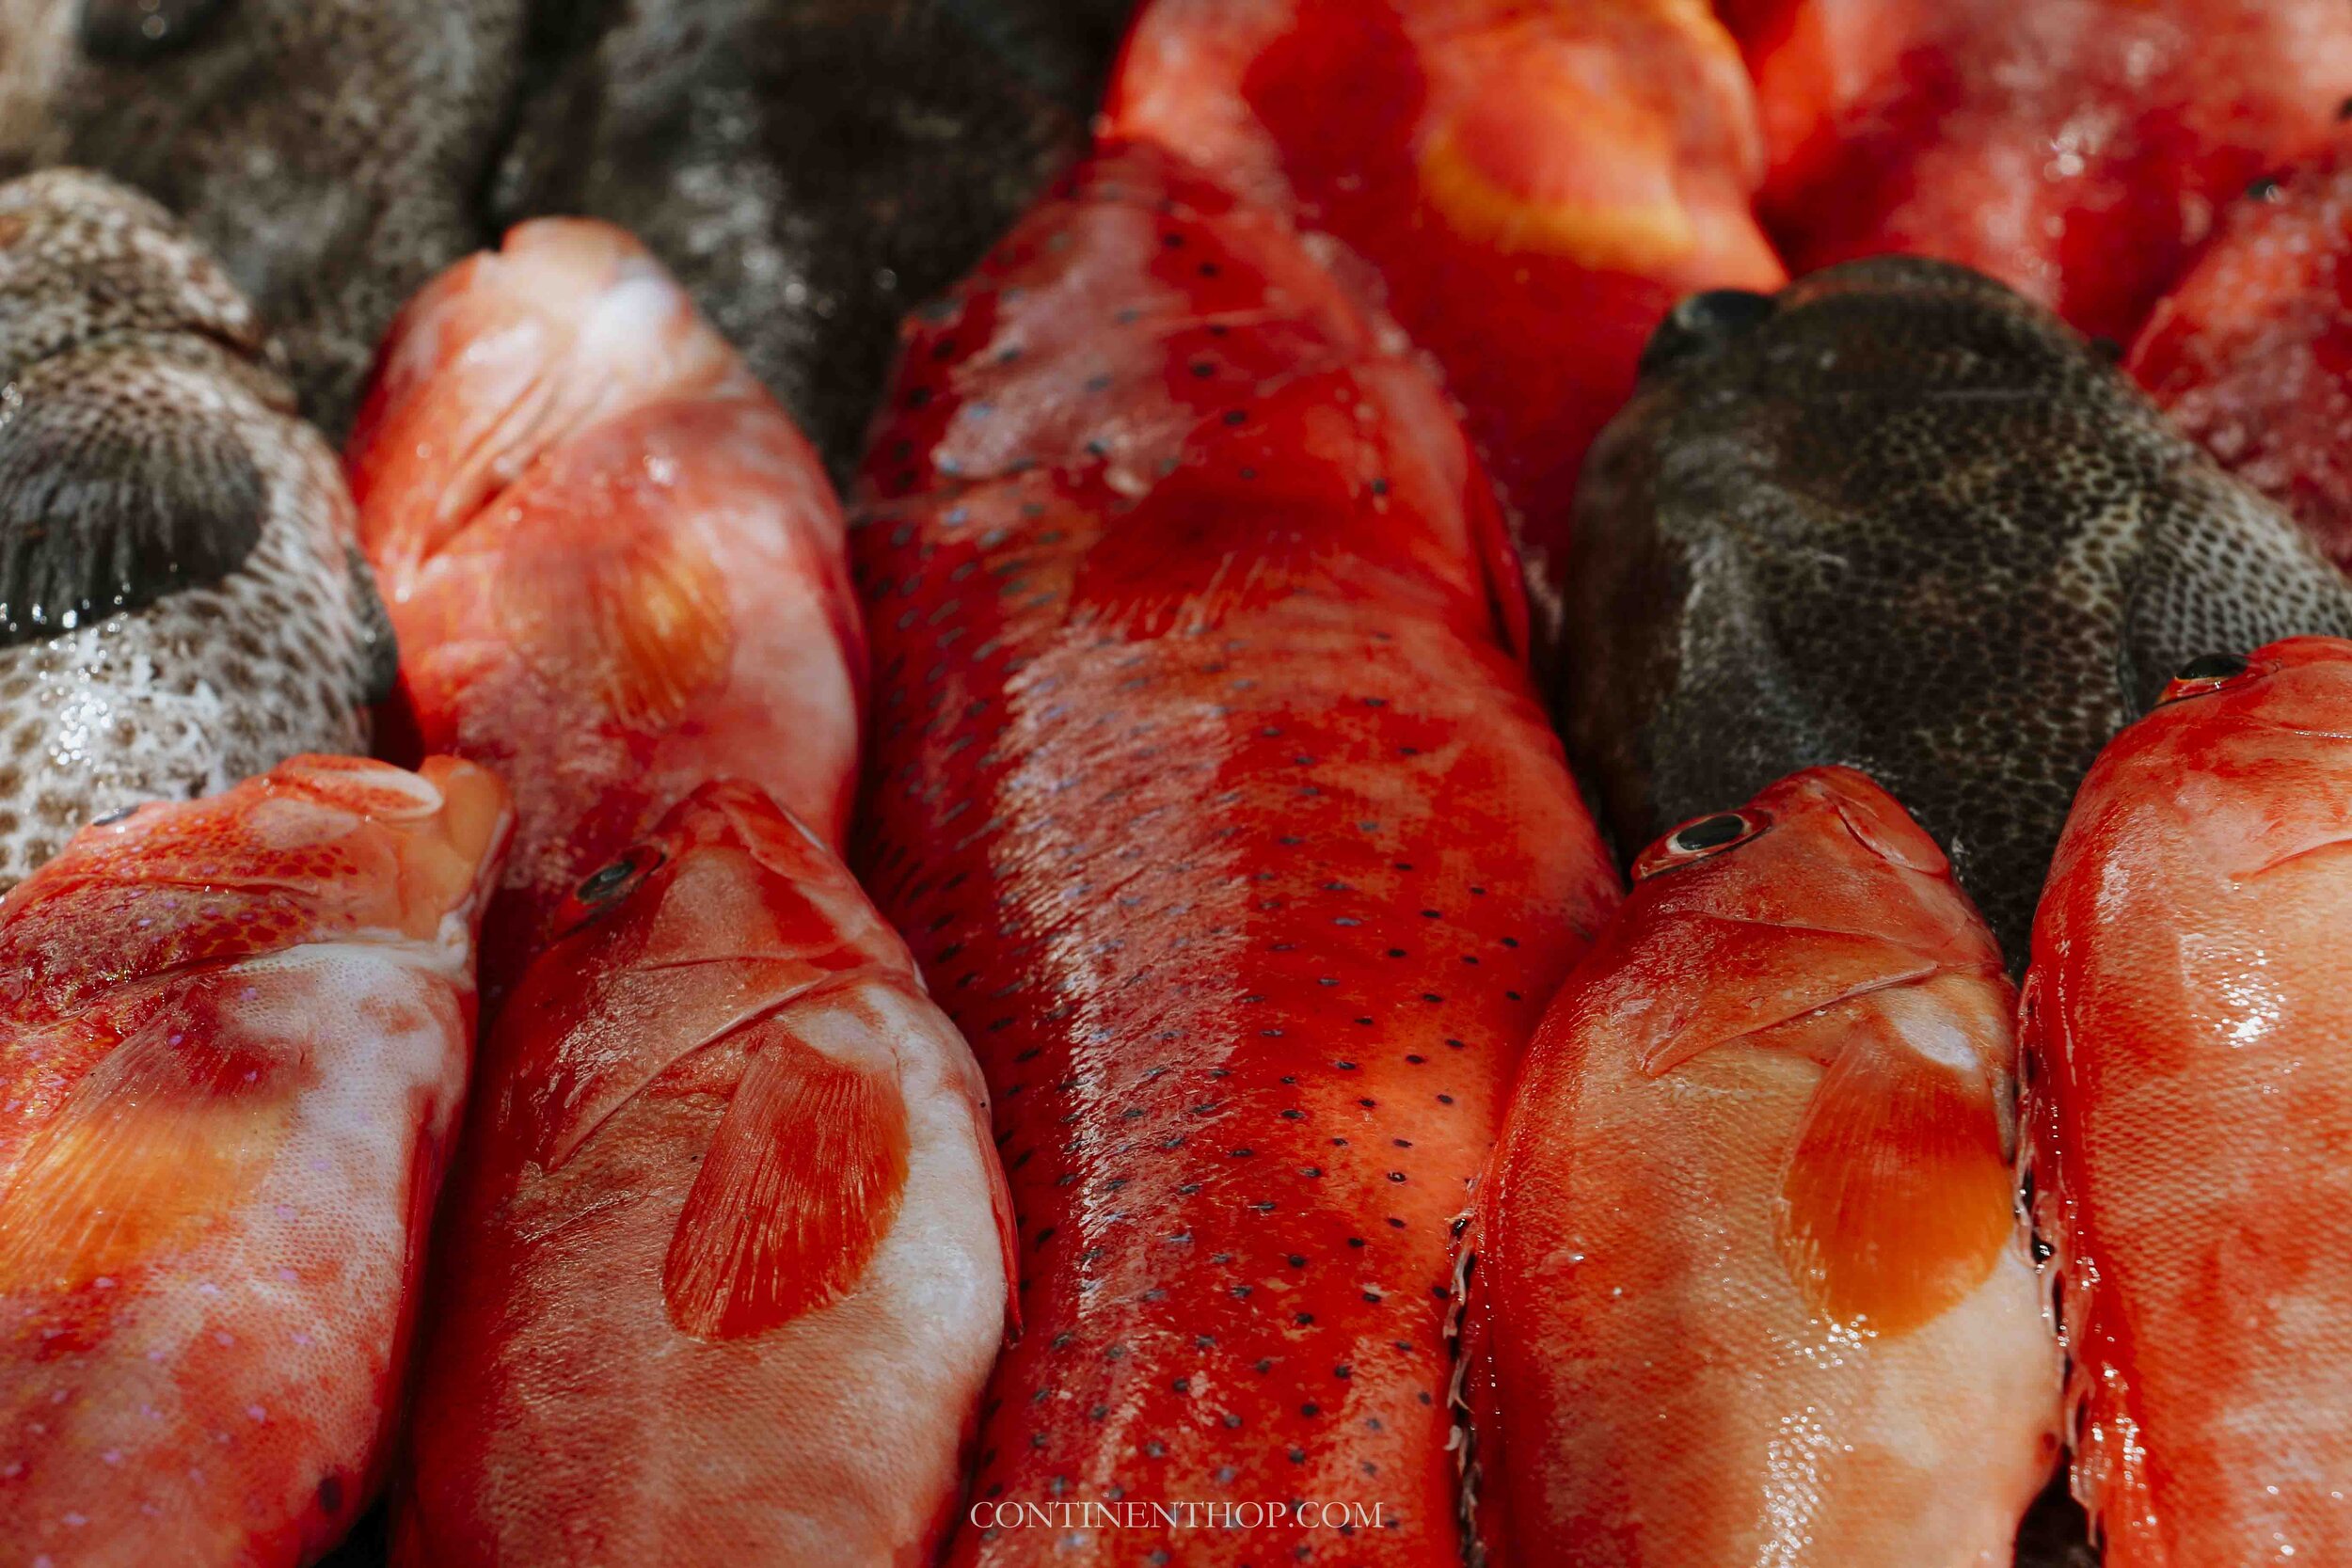 Red fish being sold in Mauritius markets